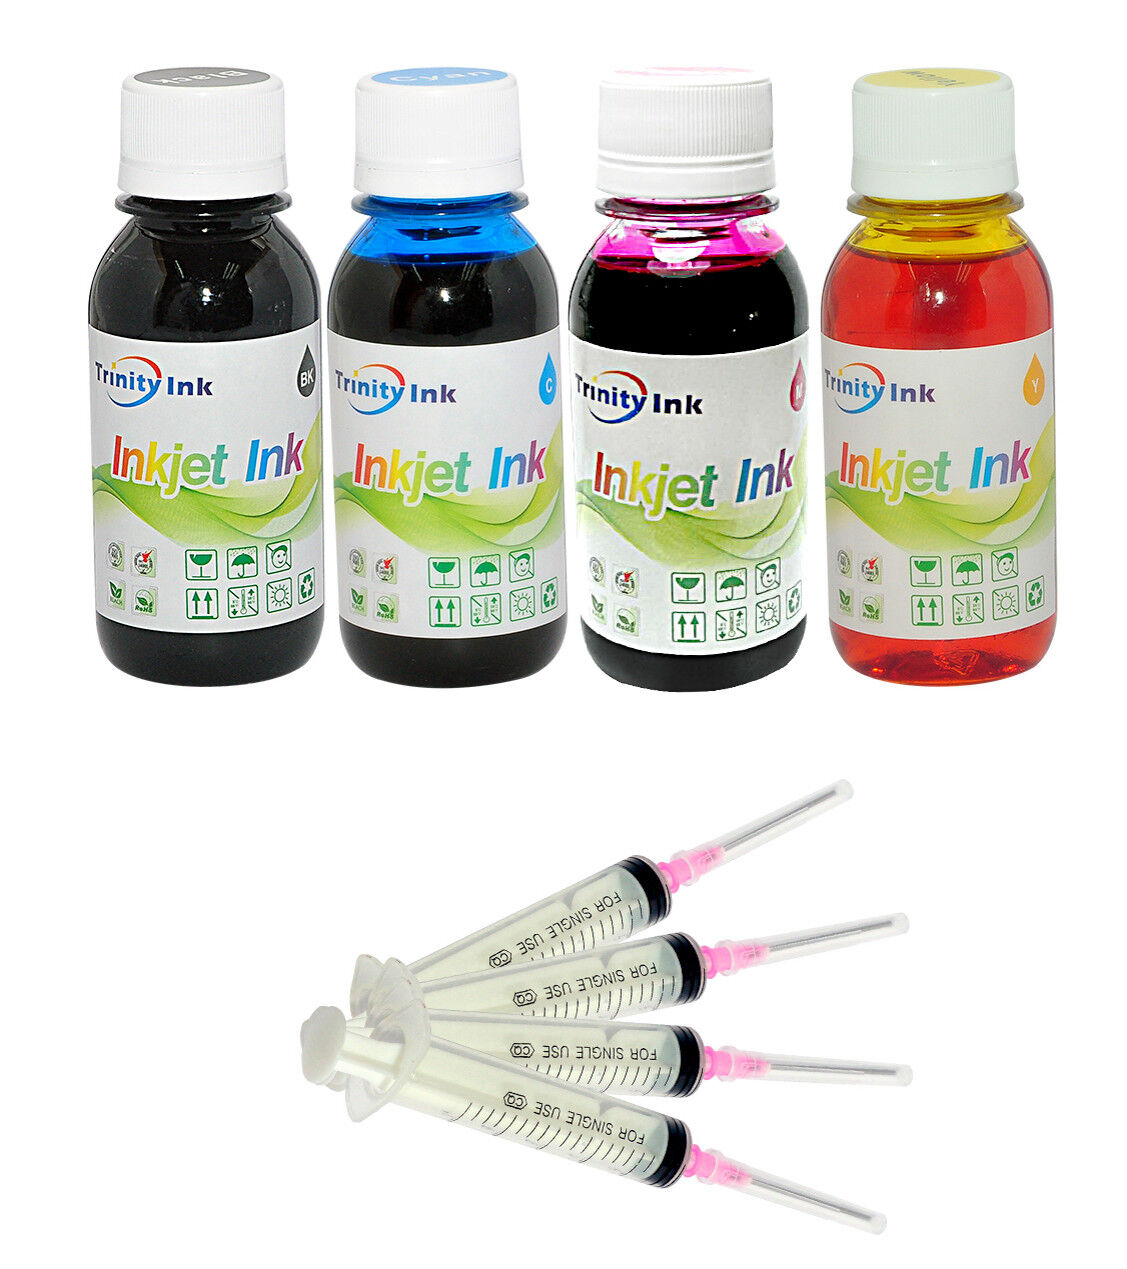 4x100ml premium refill Ink for Brother DCP-T300 DCP-T500W DCP-T700W DCP-T800W